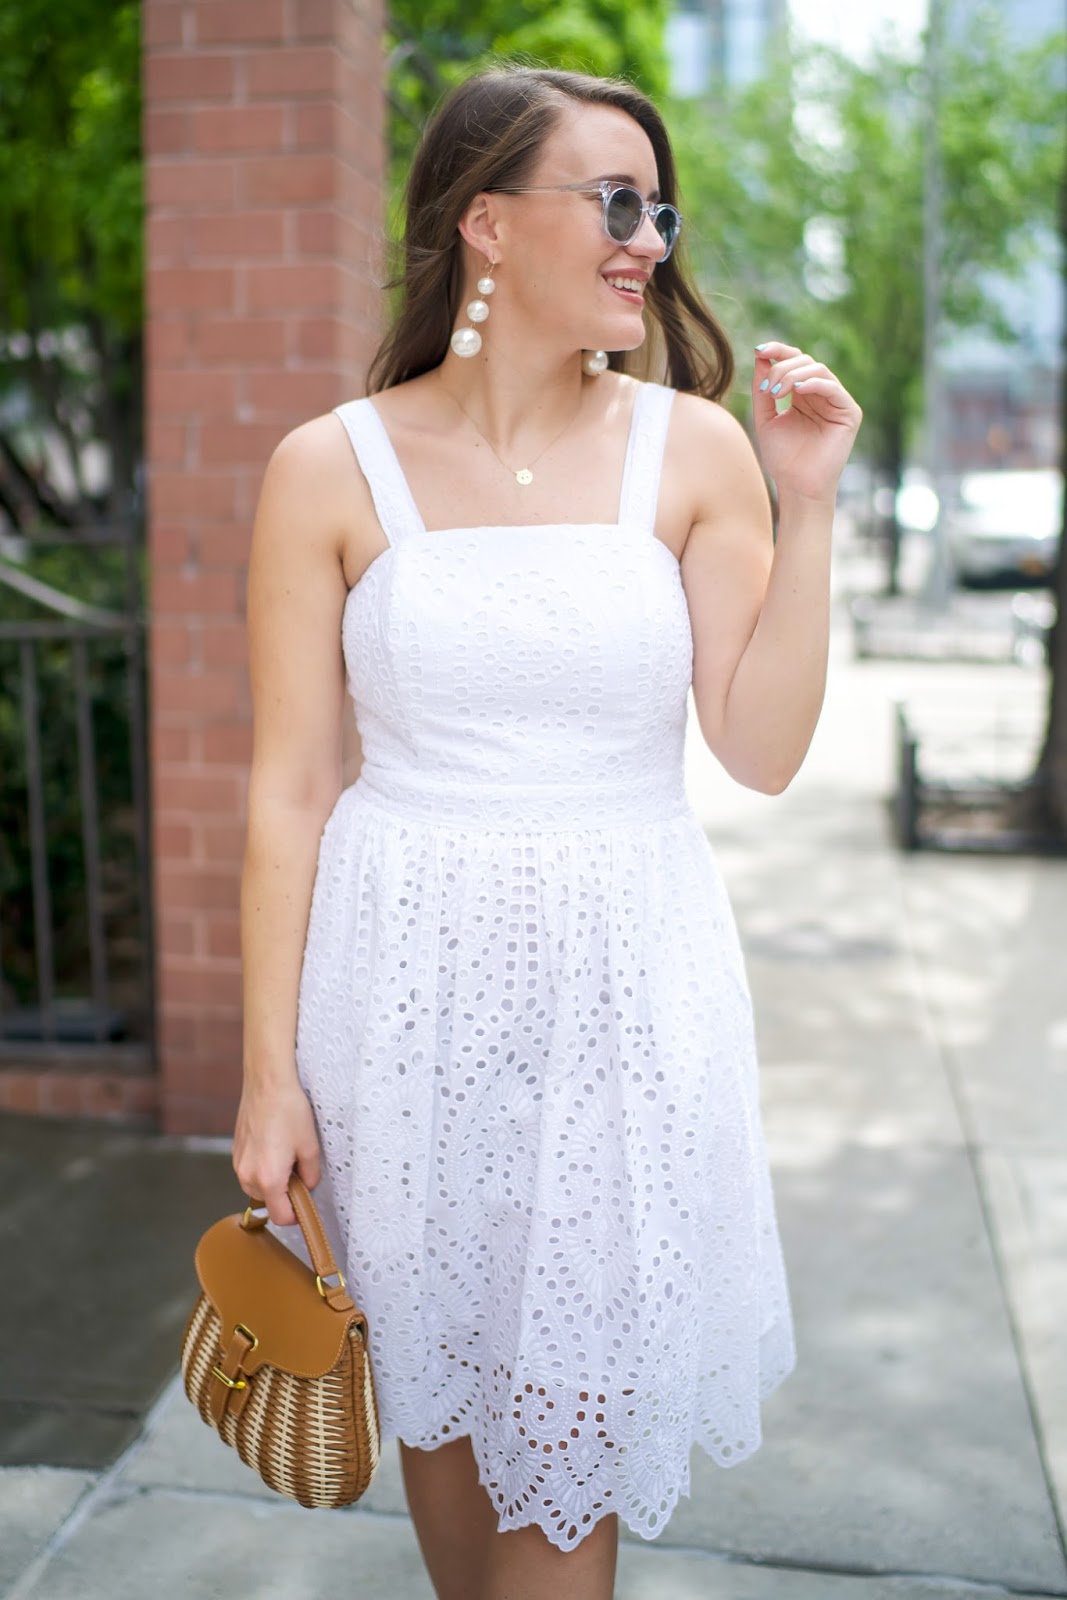 Eyelet Dress for Spring | New York City Fashion and Lifestyle Blog ...